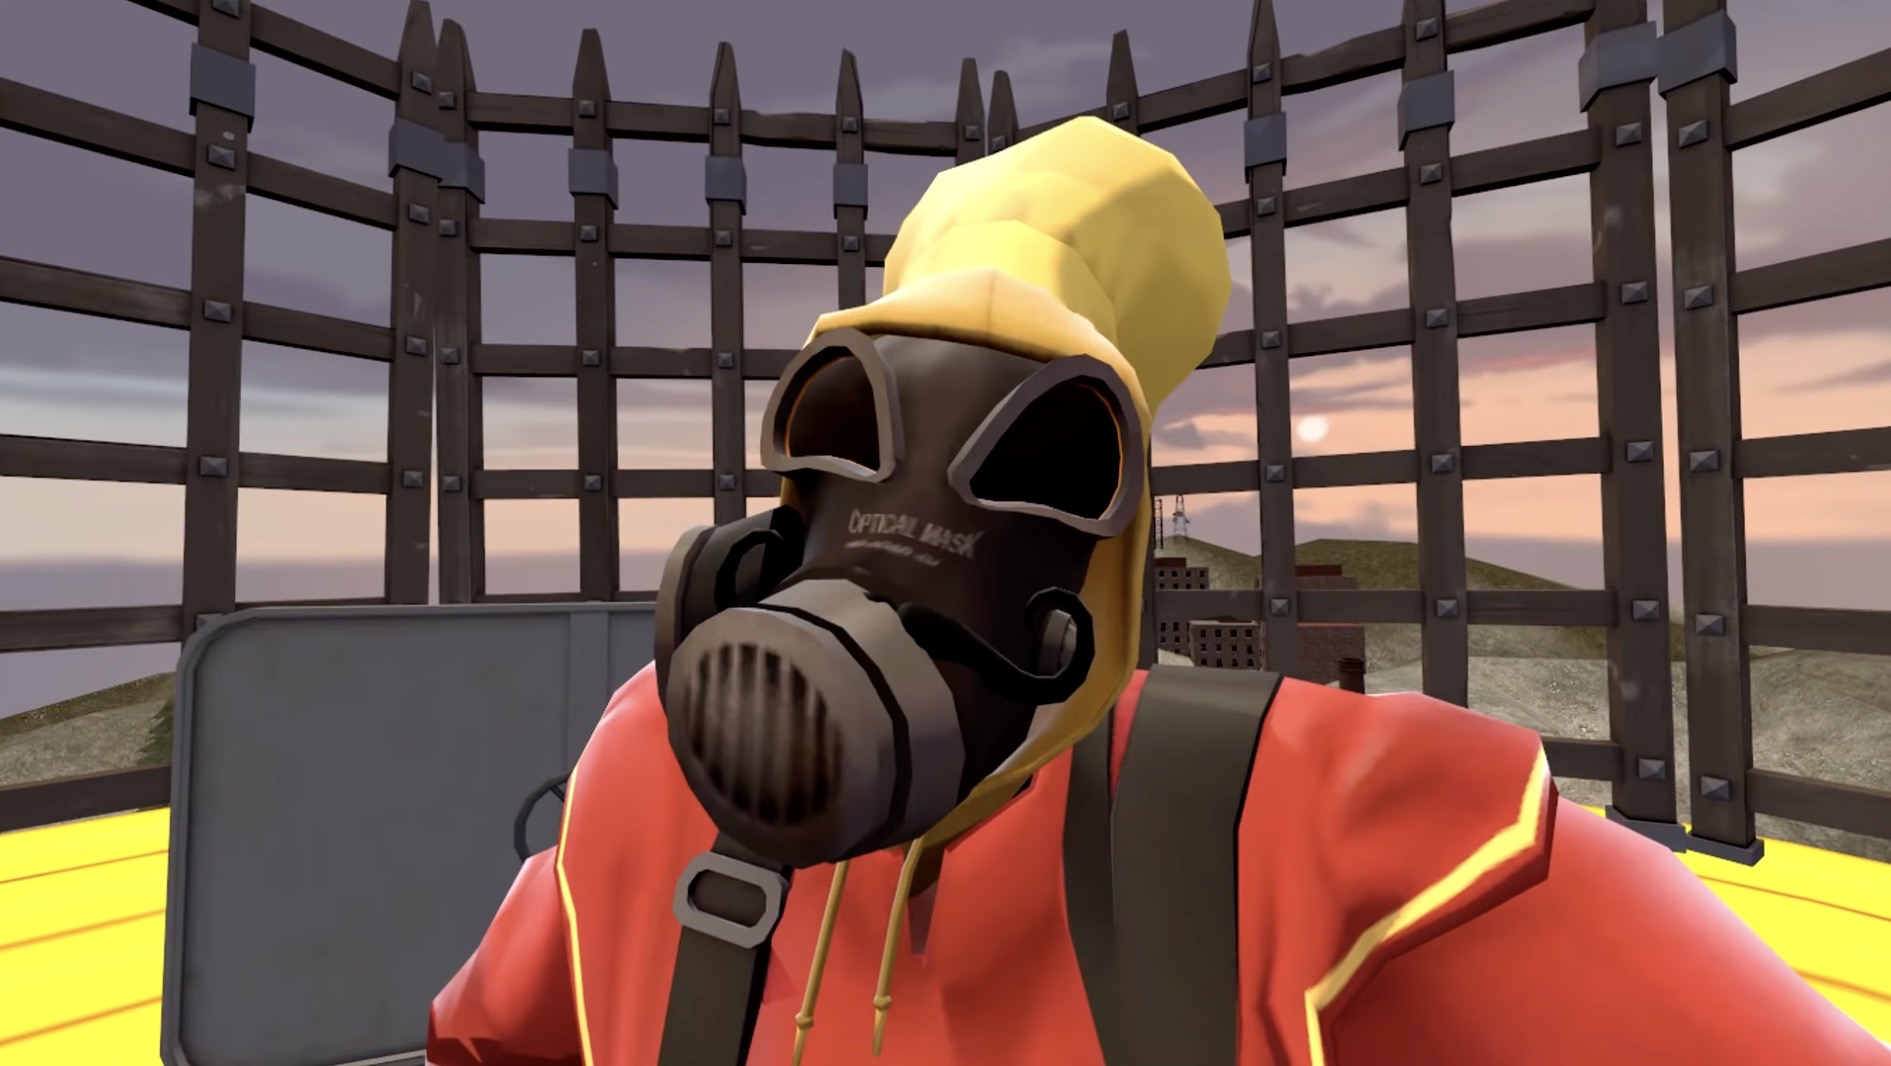 Noise Maker - Official TF2 Wiki